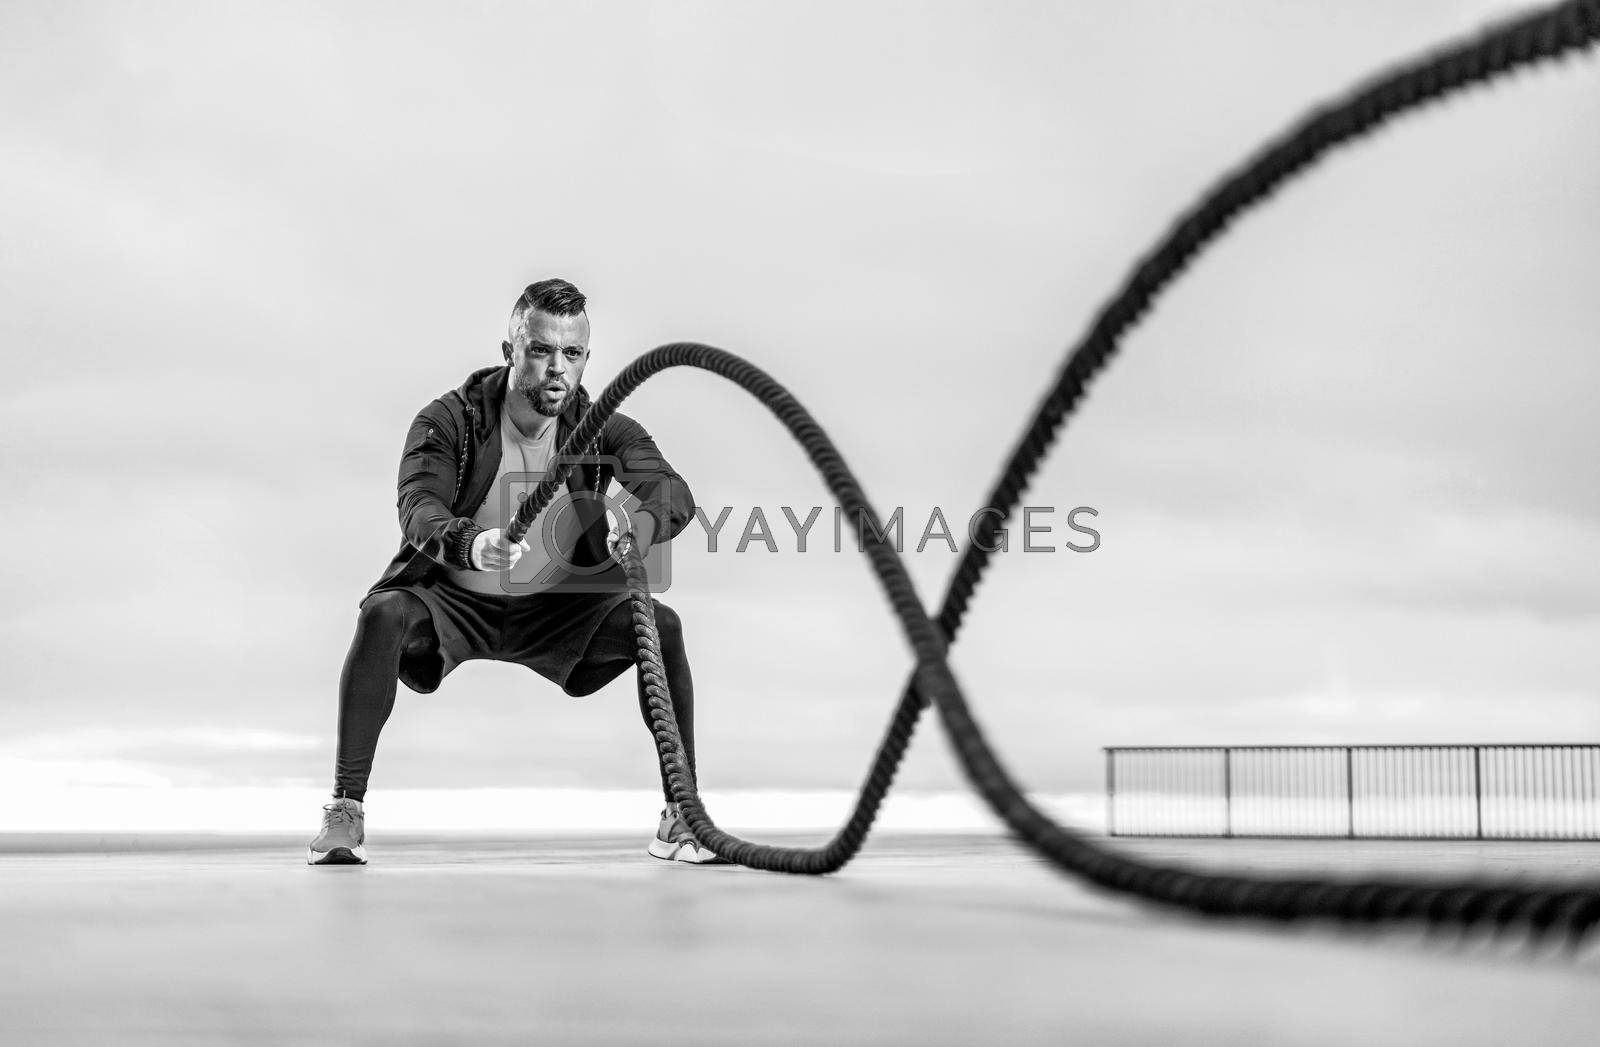 Royalty free image of Athletic man with a battle rope doing sports exercises on the ocean by MikeOrlov